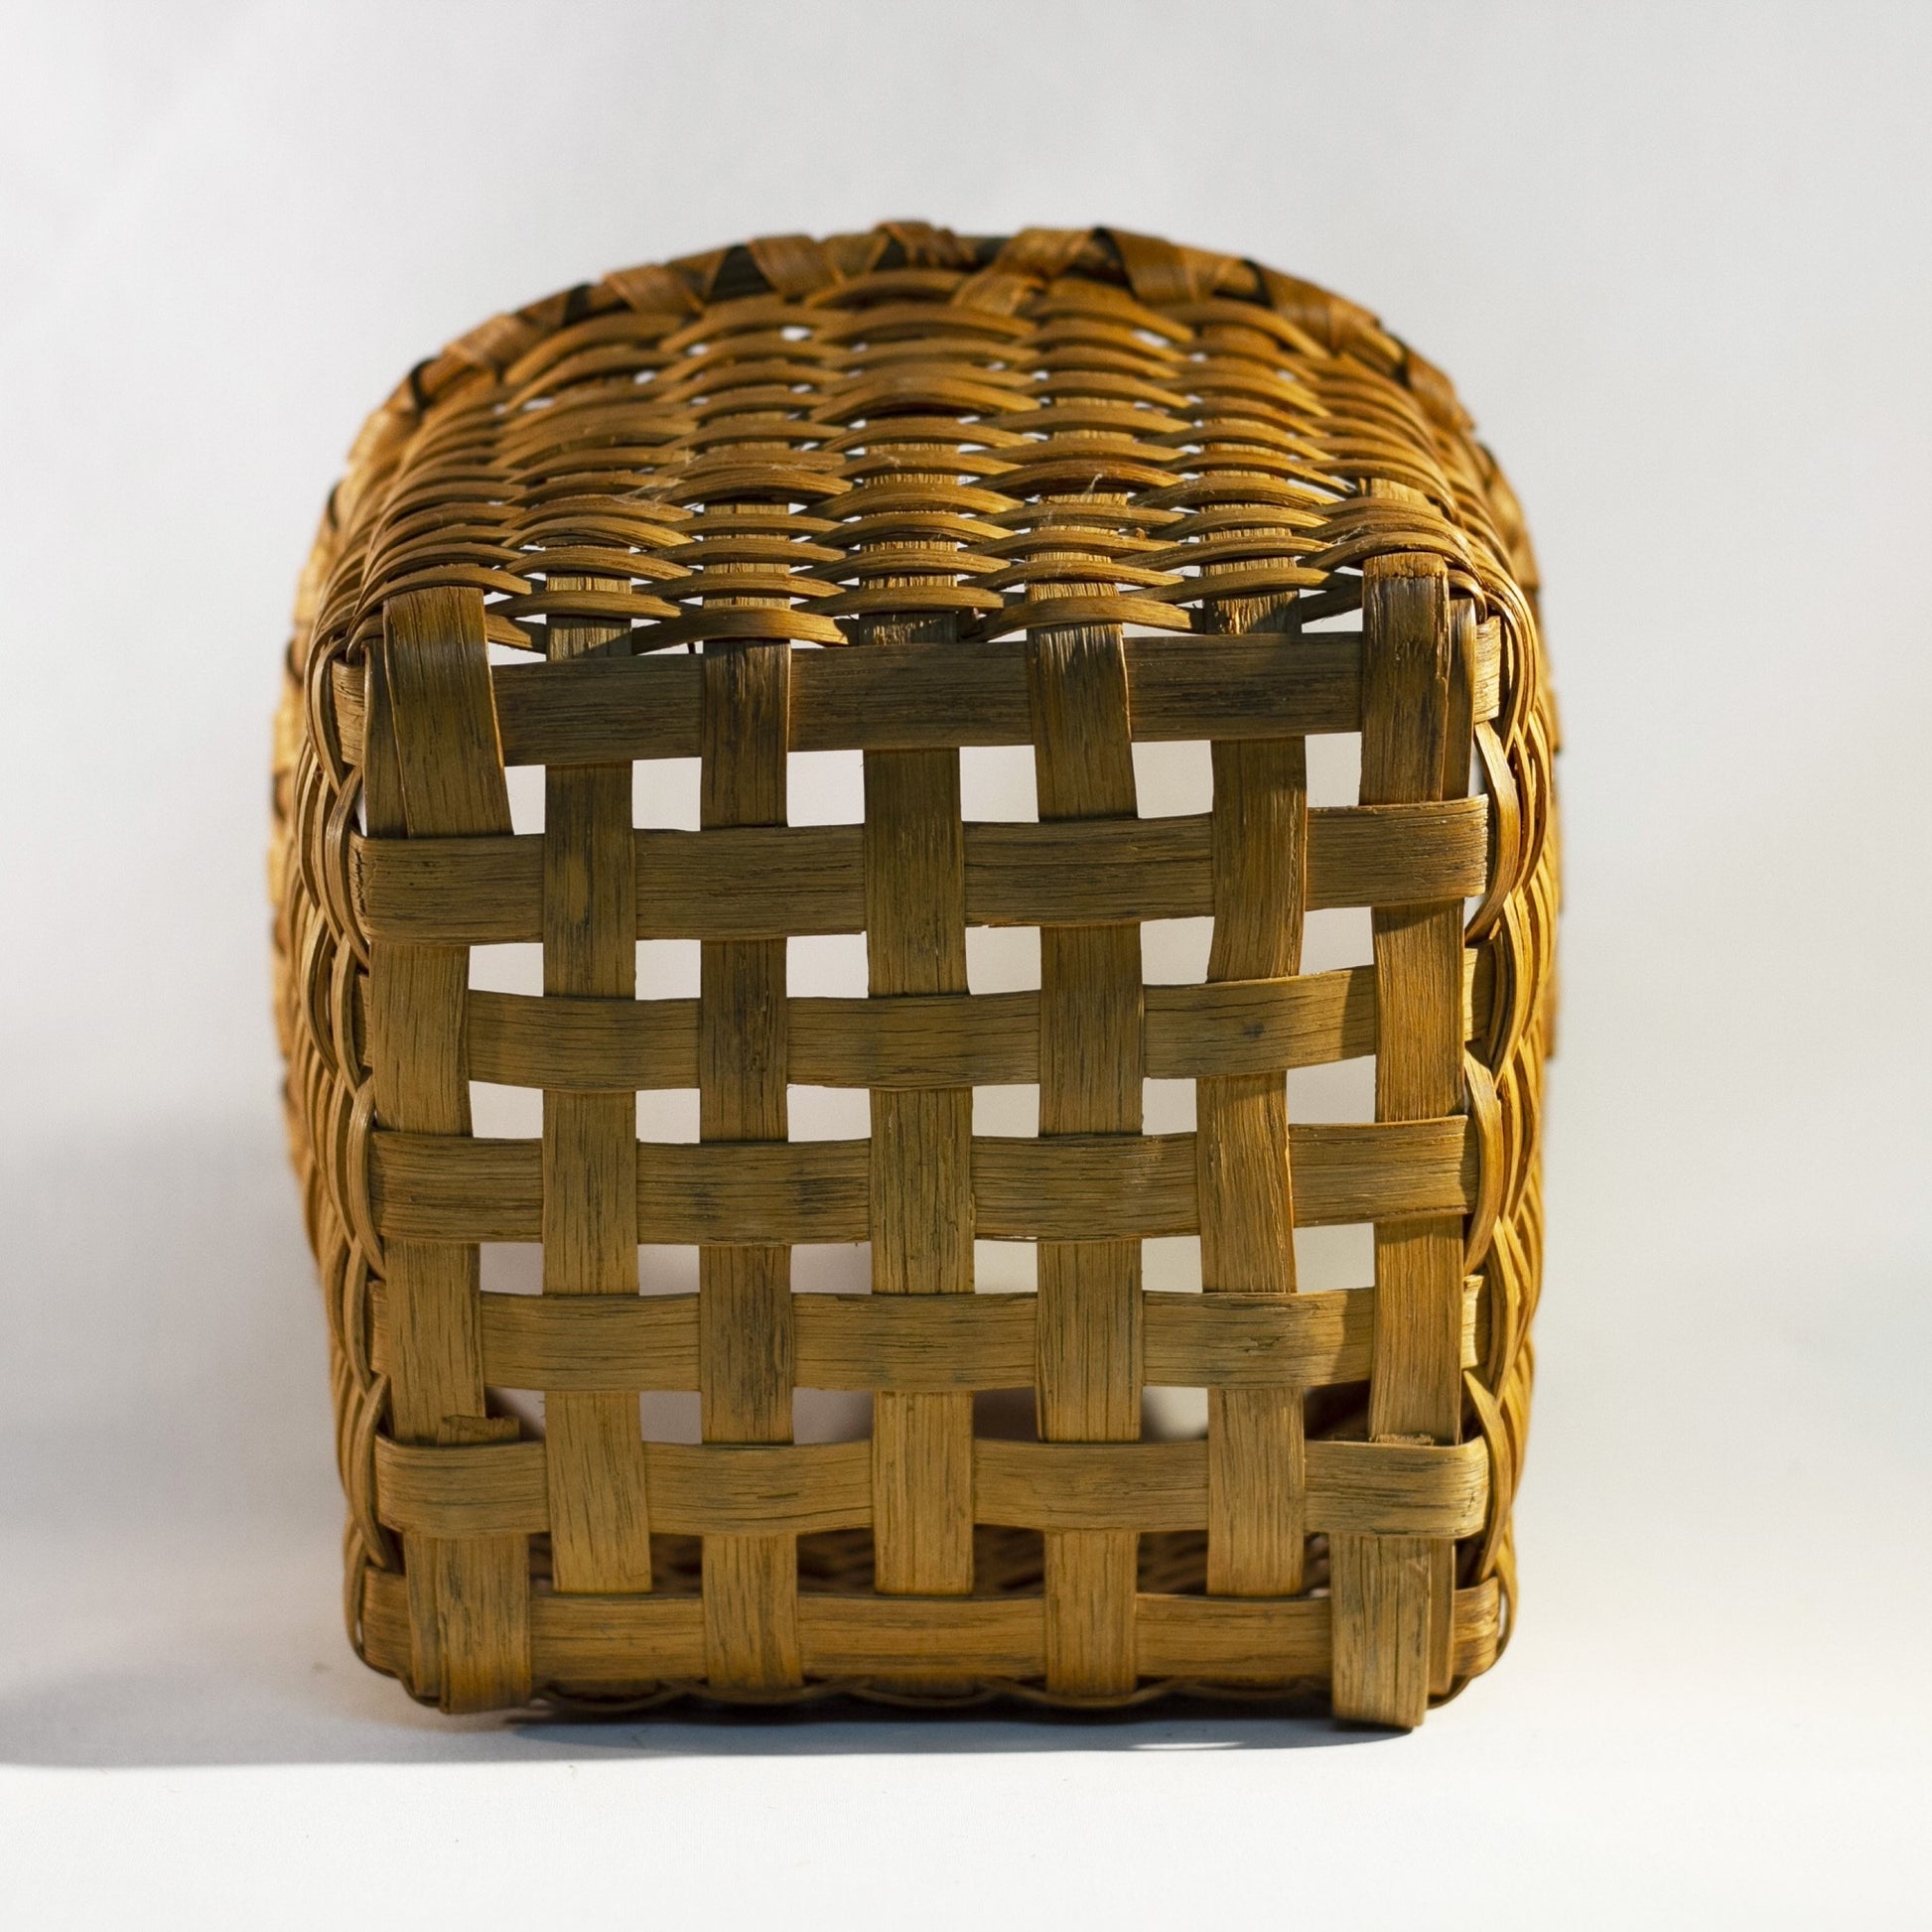 Antique Styled Sewing Basket  Amish Woven Wicker Organizer w